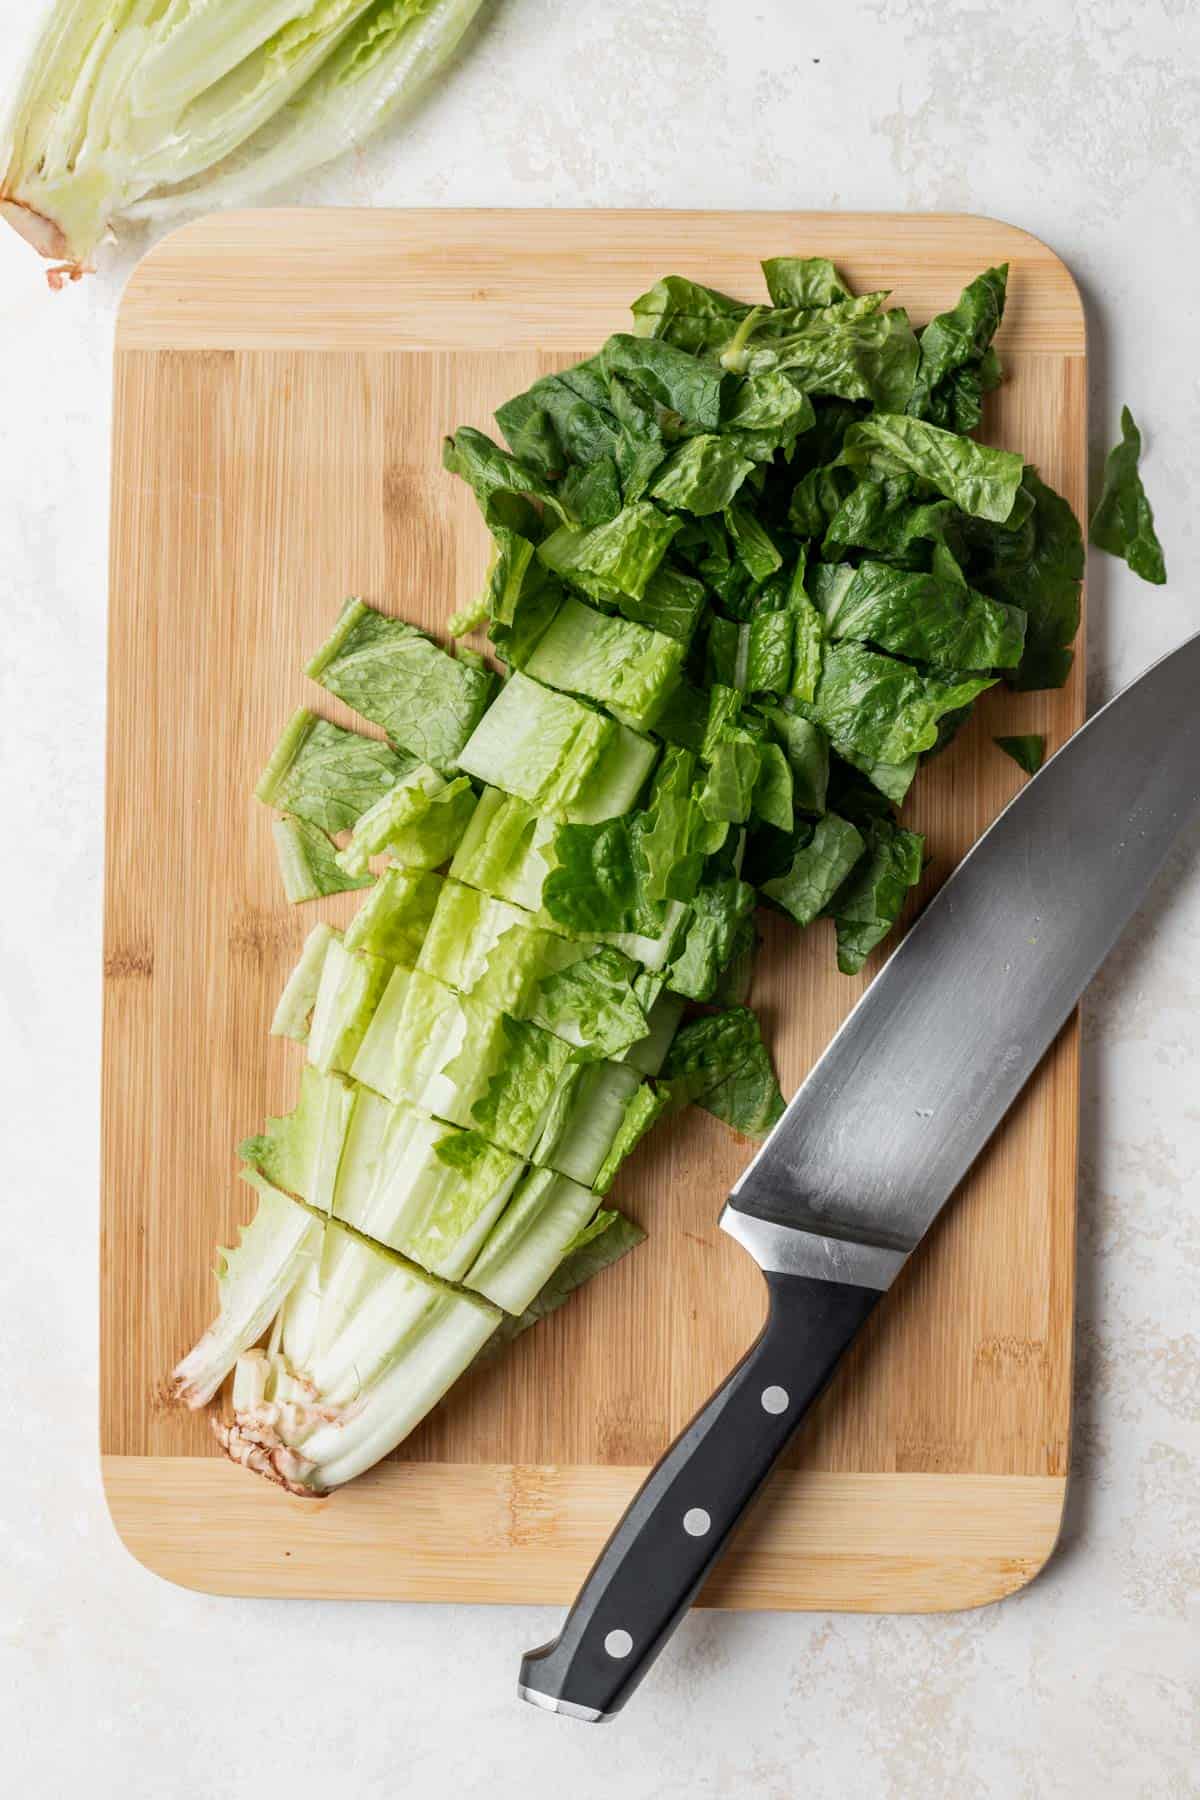 Romaine lettuce cut on a wooden cutting board with a chef's knife next to it.